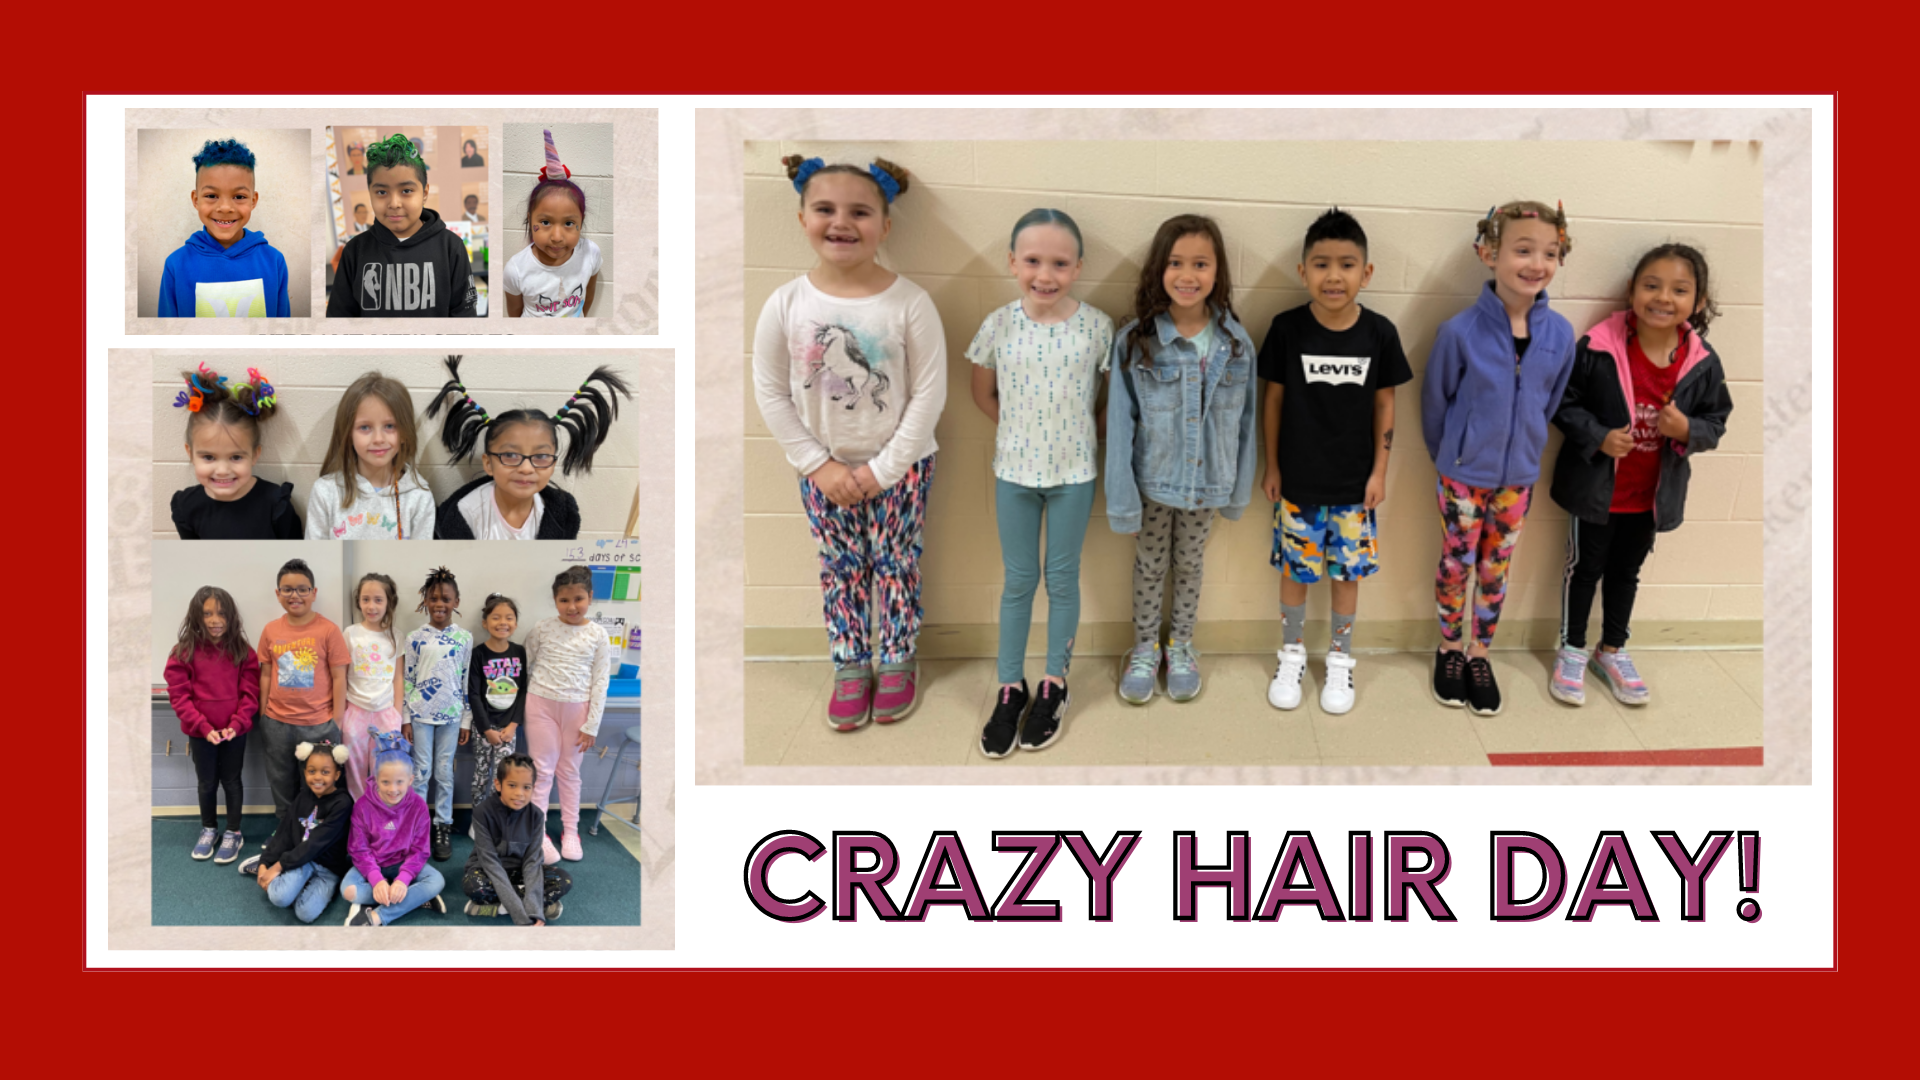 Collection of students with crazy hair